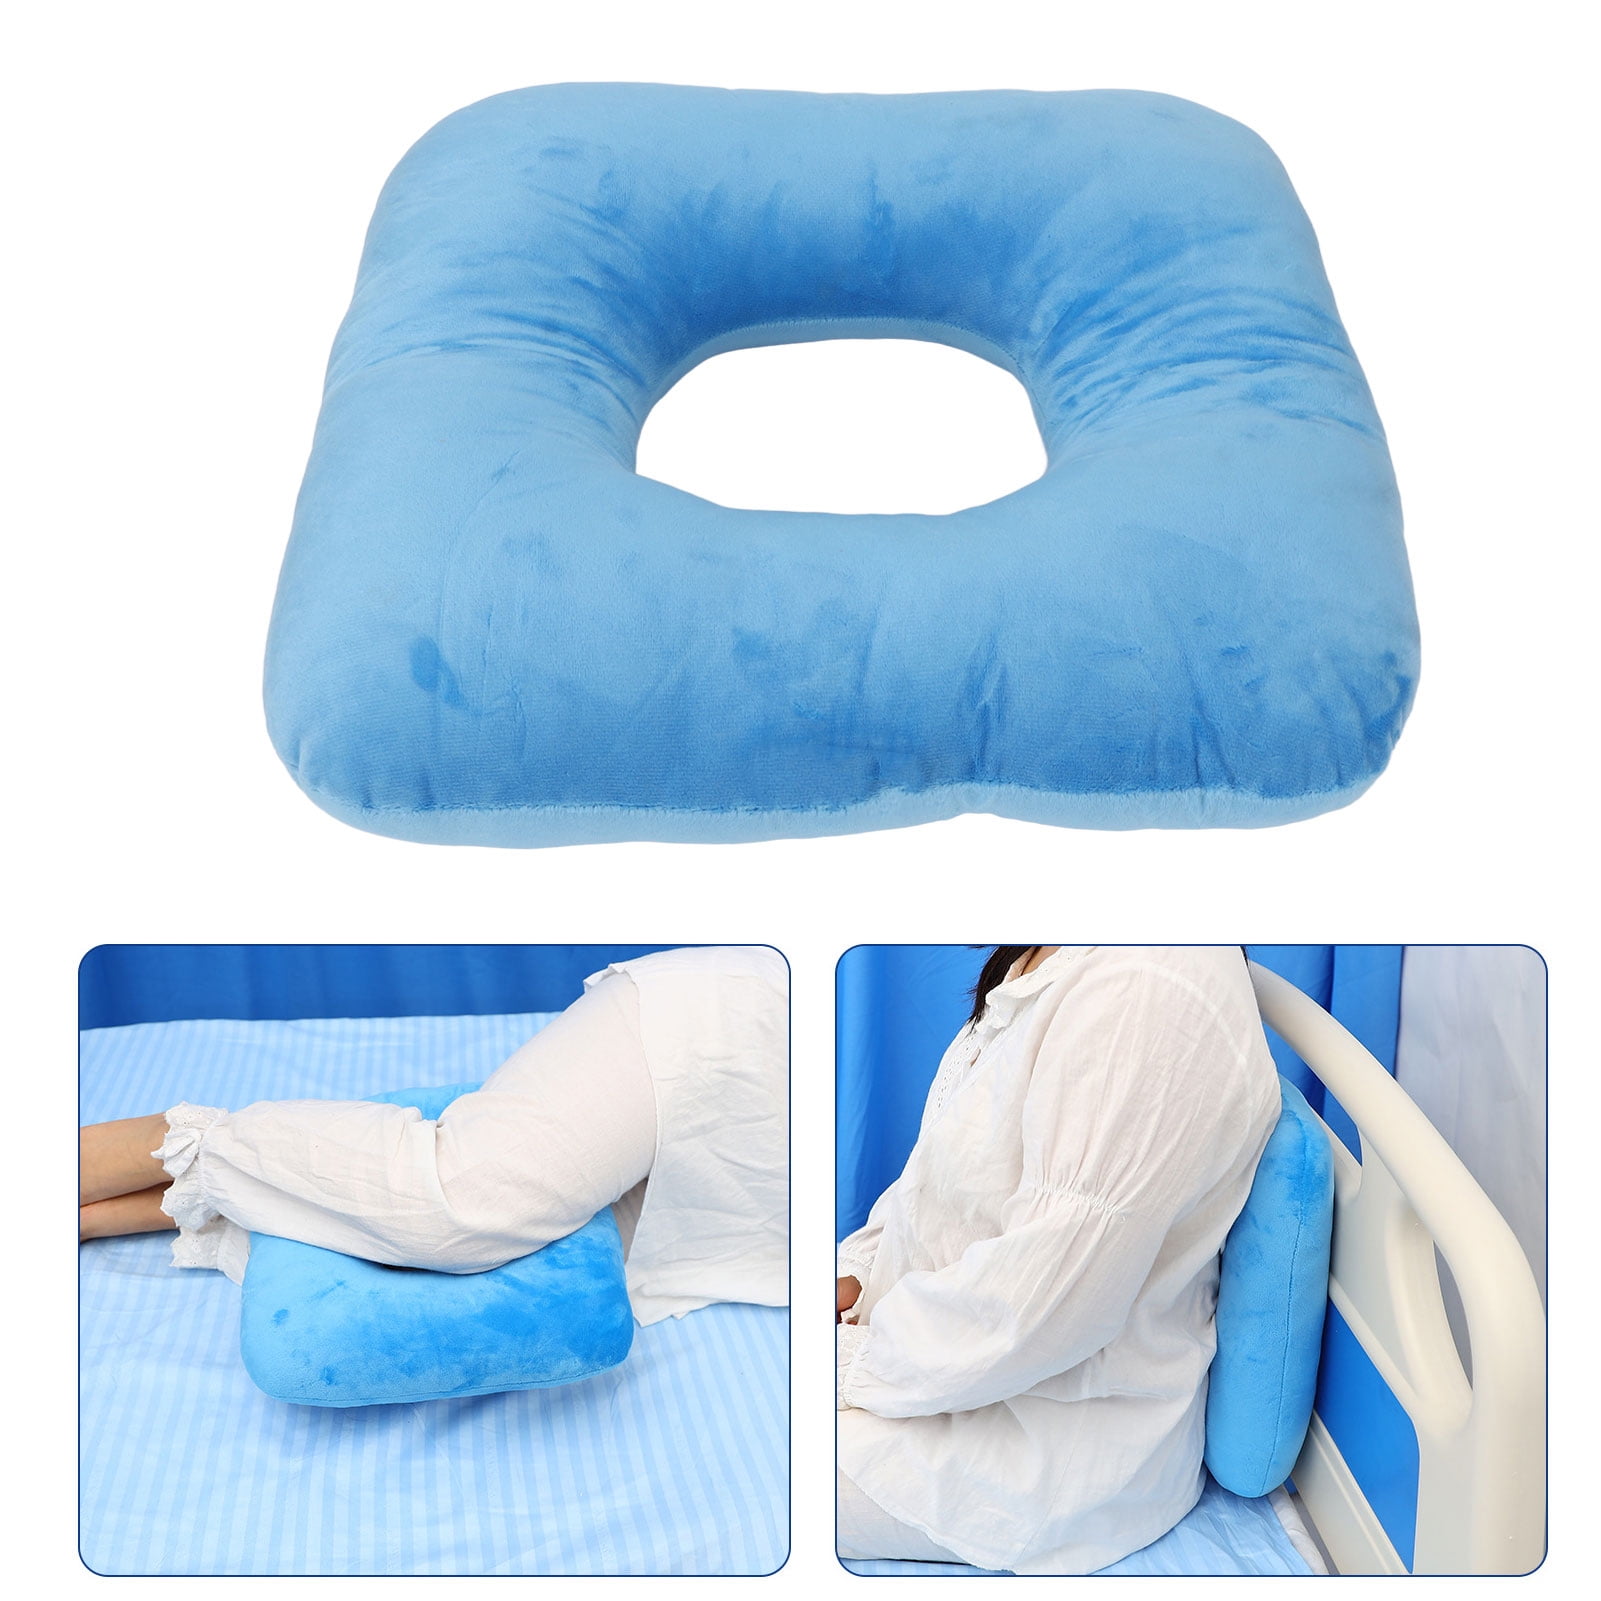 Clevive™ Hemorrhoid Cushion – Clevive